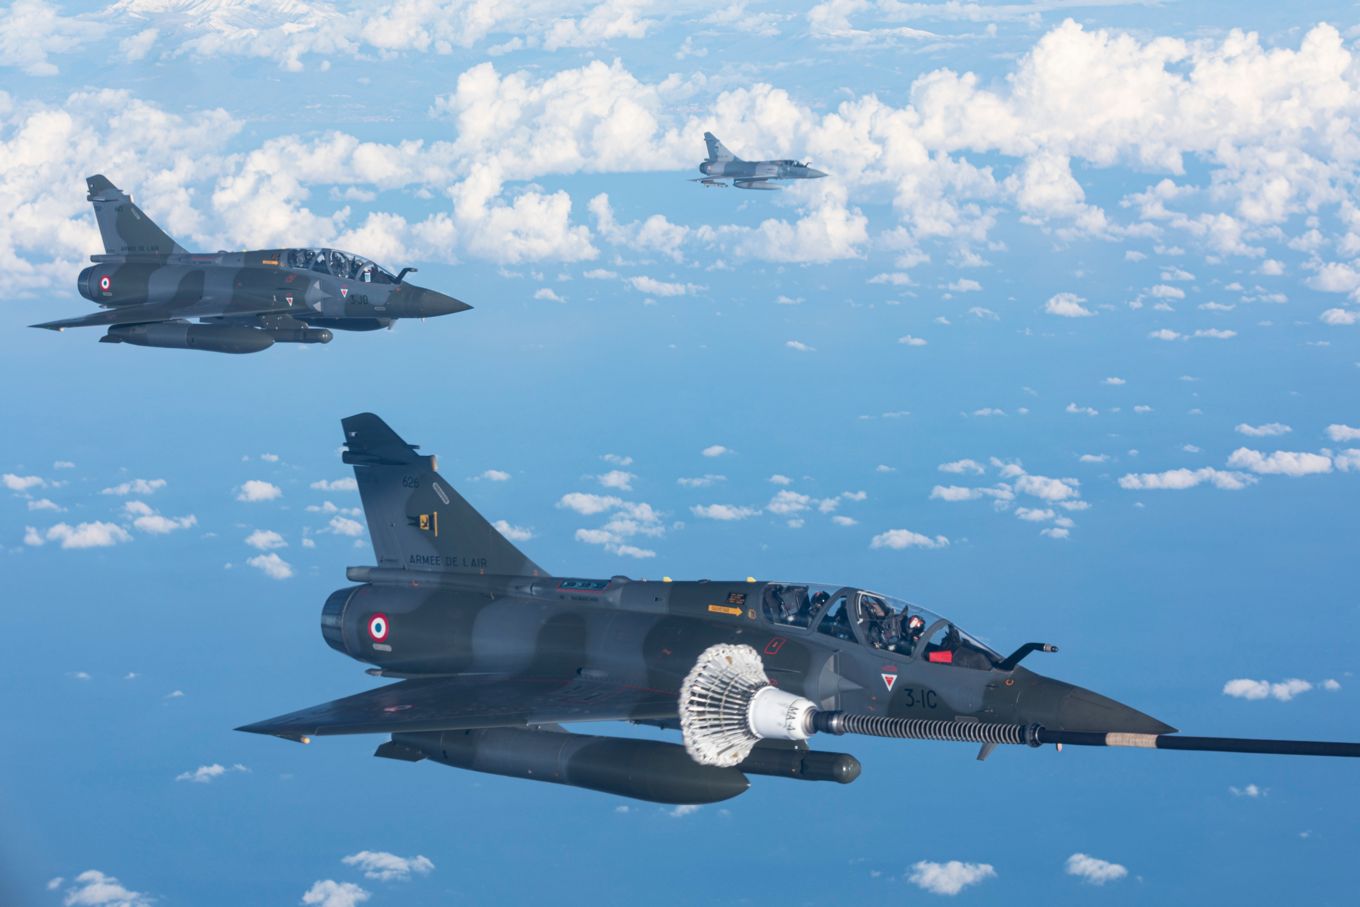 Image shows three French Mirage 2000 aircraft flying.